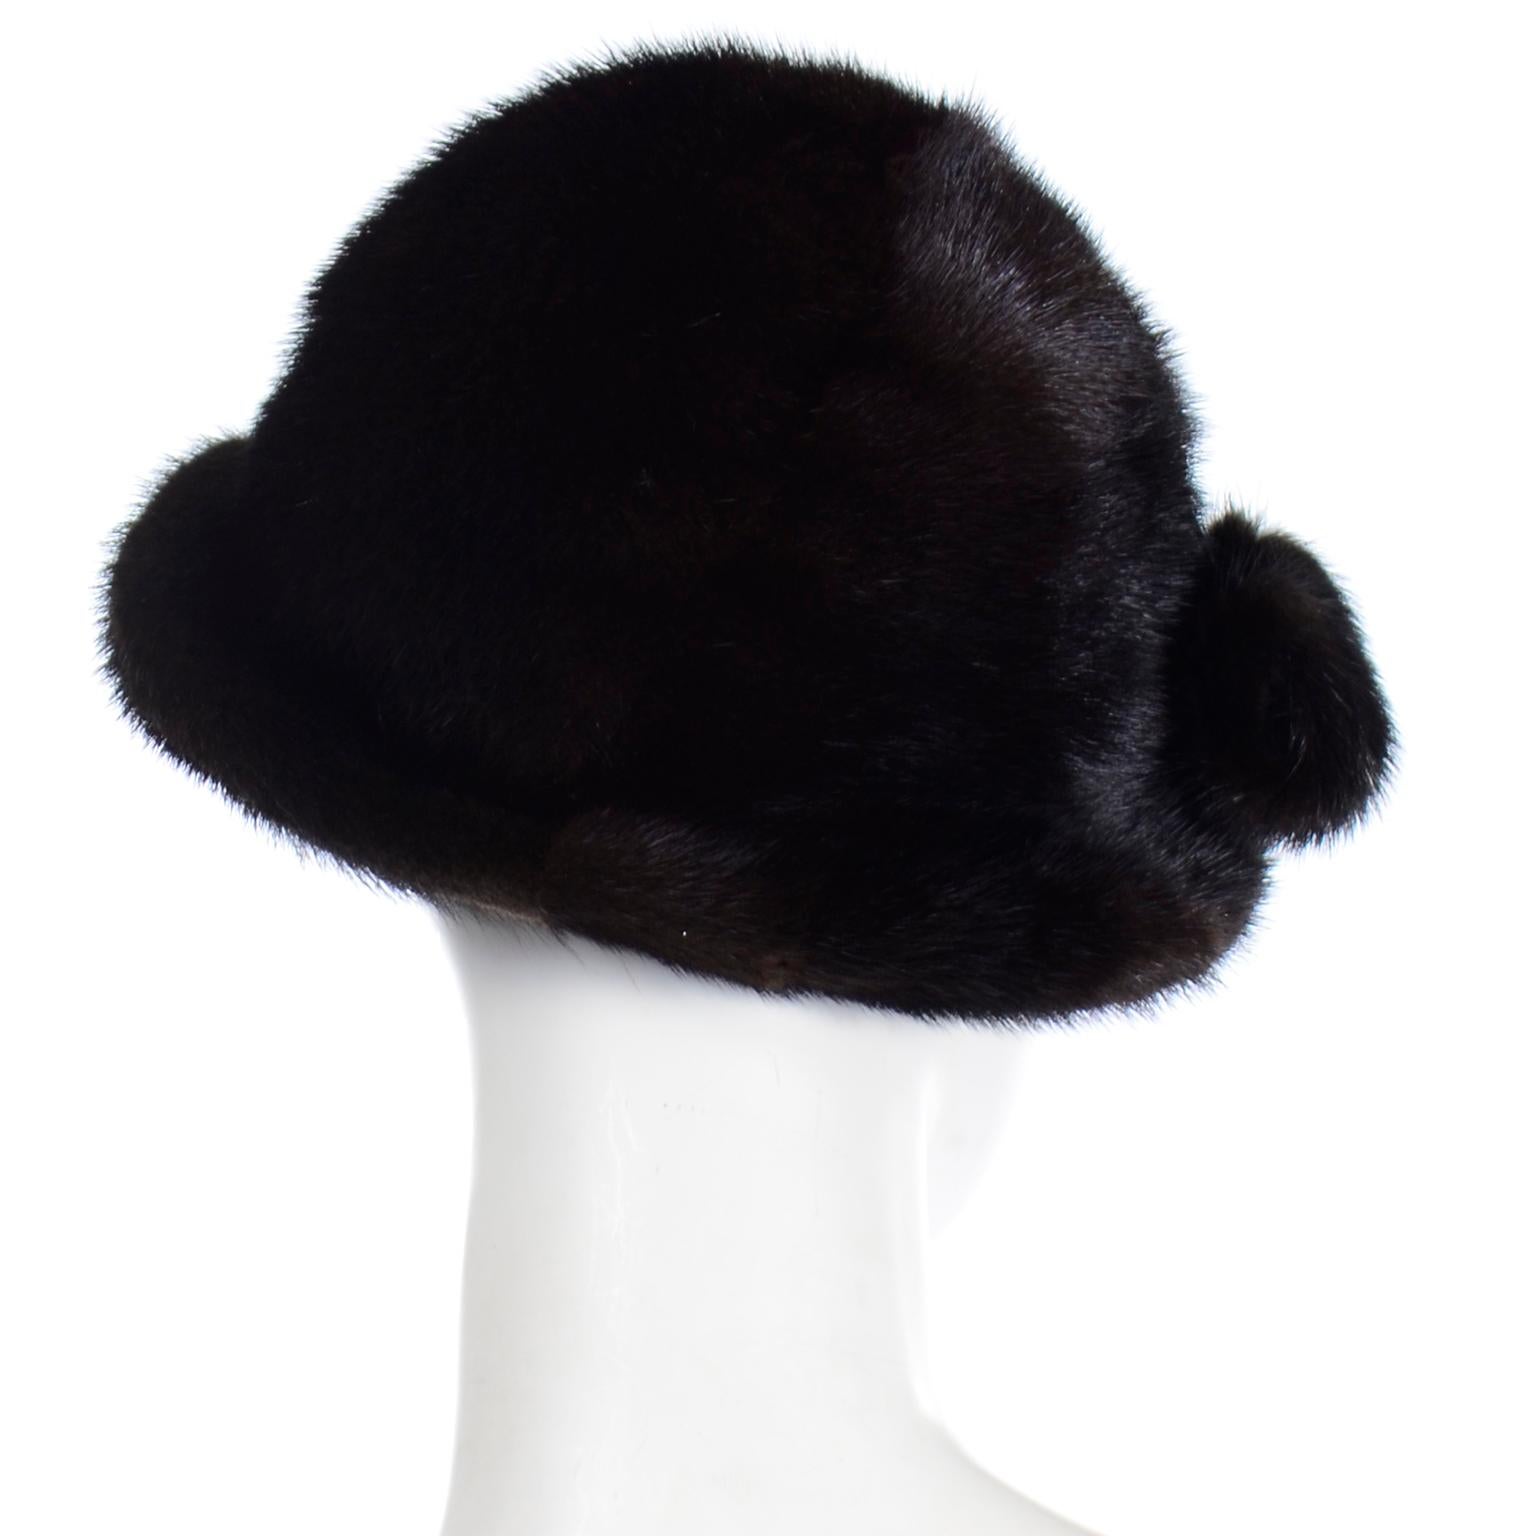 Andre Canada Vintage Mink Hat With Pom Poms In Excellent Condition For Sale In Portland, OR